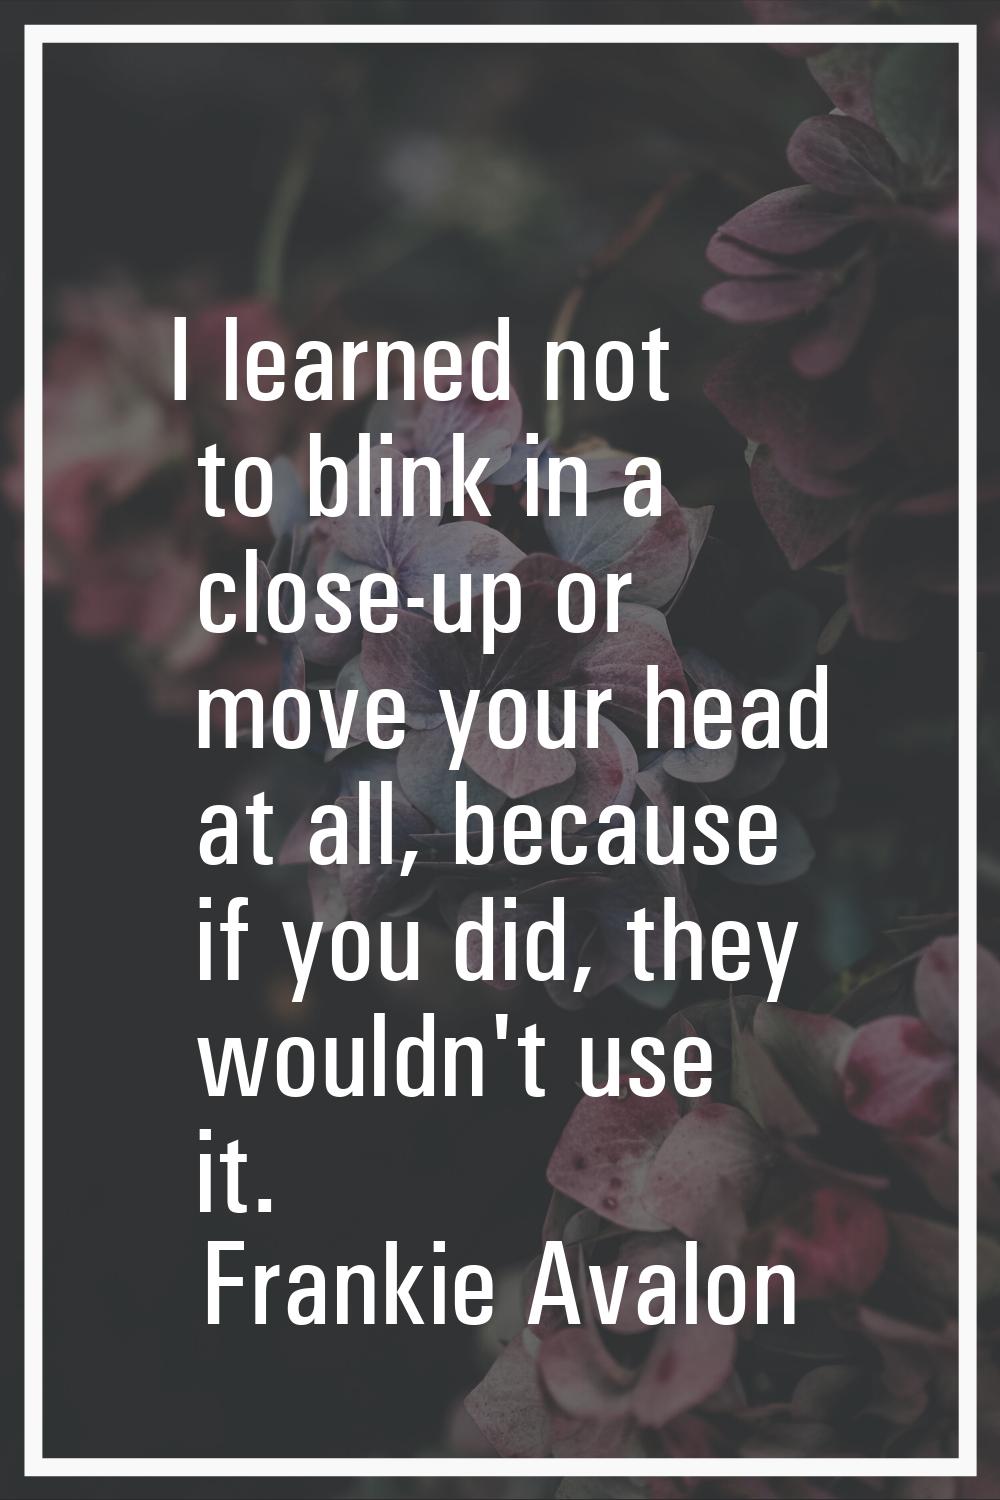 I learned not to blink in a close-up or move your head at all, because if you did, they wouldn't us